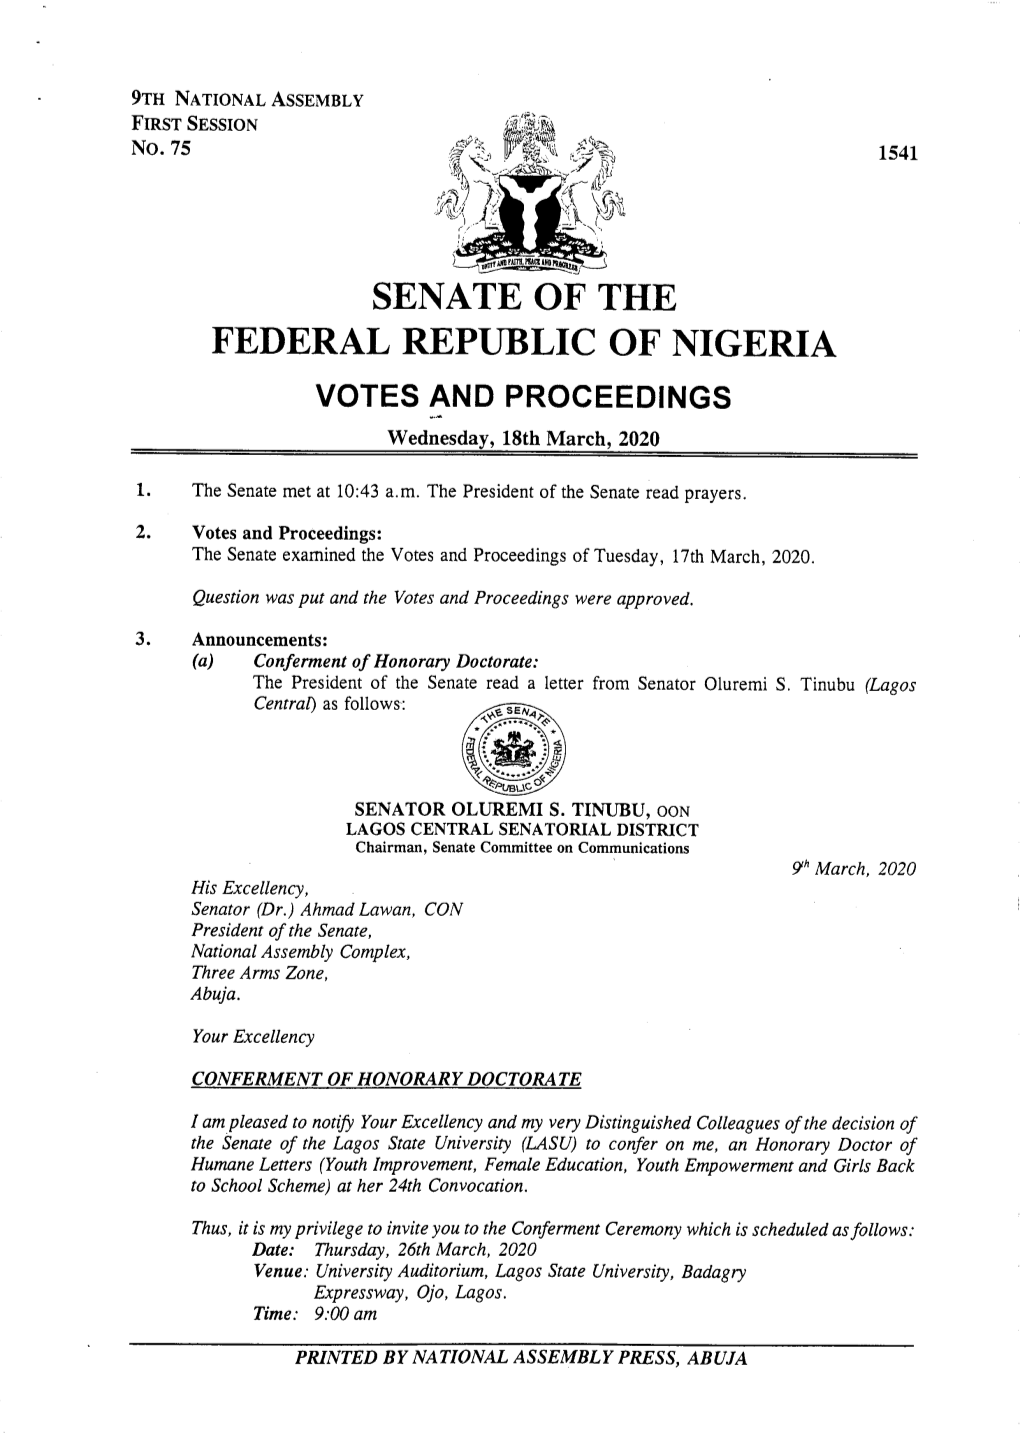 SENATE of the FEDERAL REPUBLIC of NIGERIA VOTES and PROCEEDINGS Wednesday, 18Th March, 2020